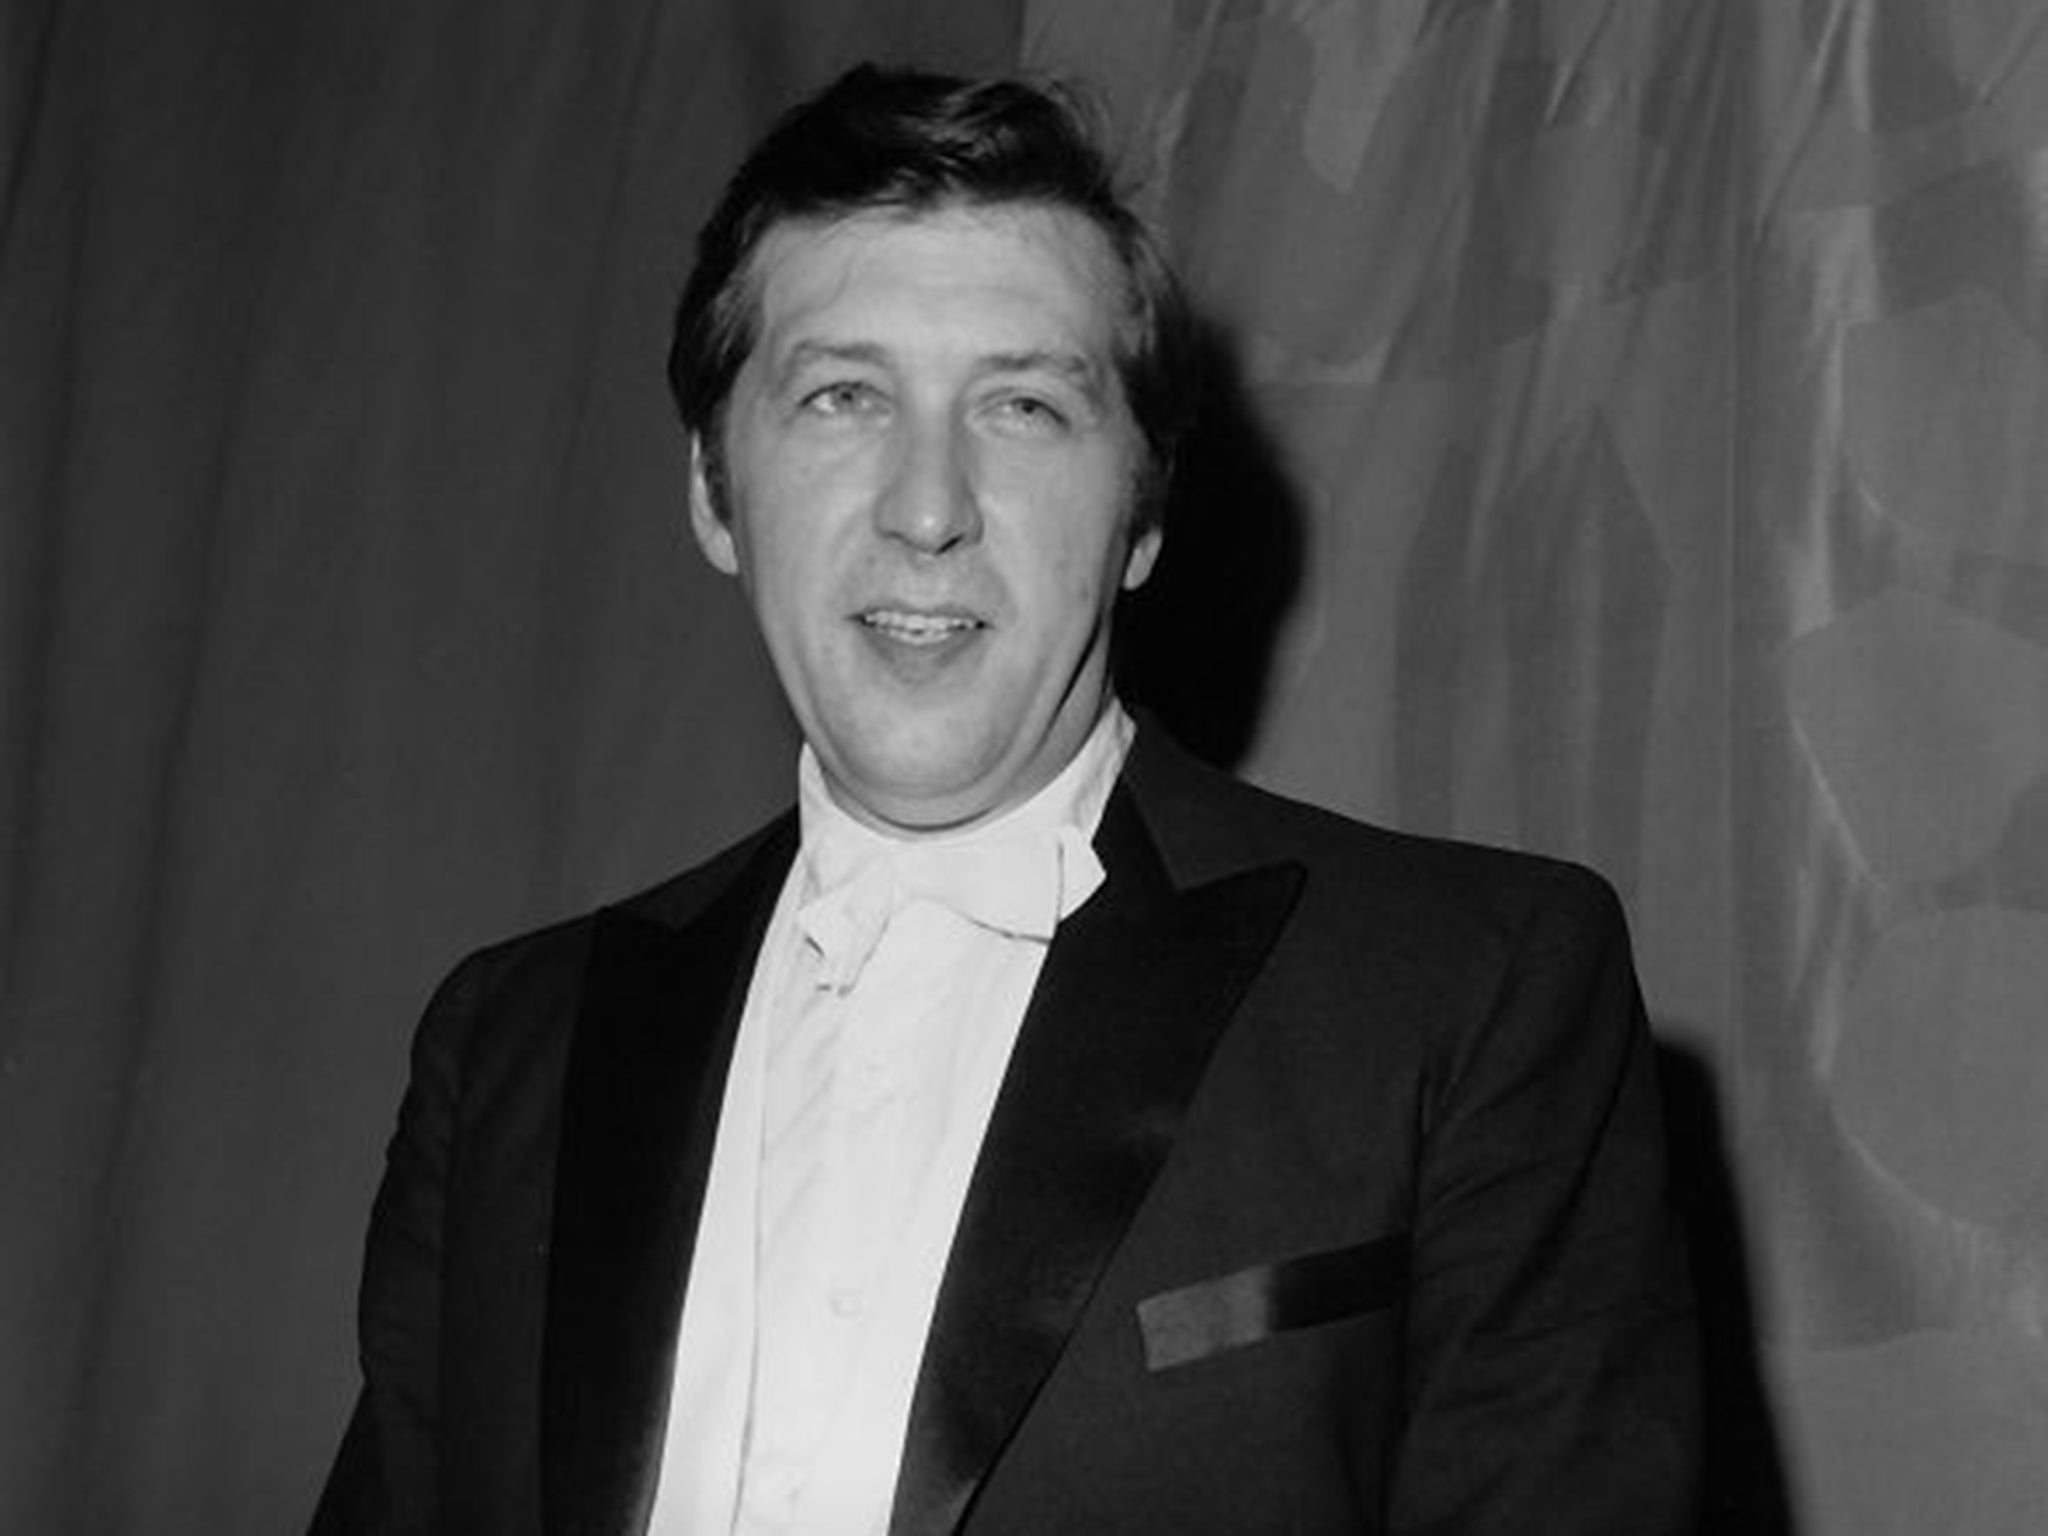 Schuller in 1967: he won both the Pulitzer Prize and a Grammy